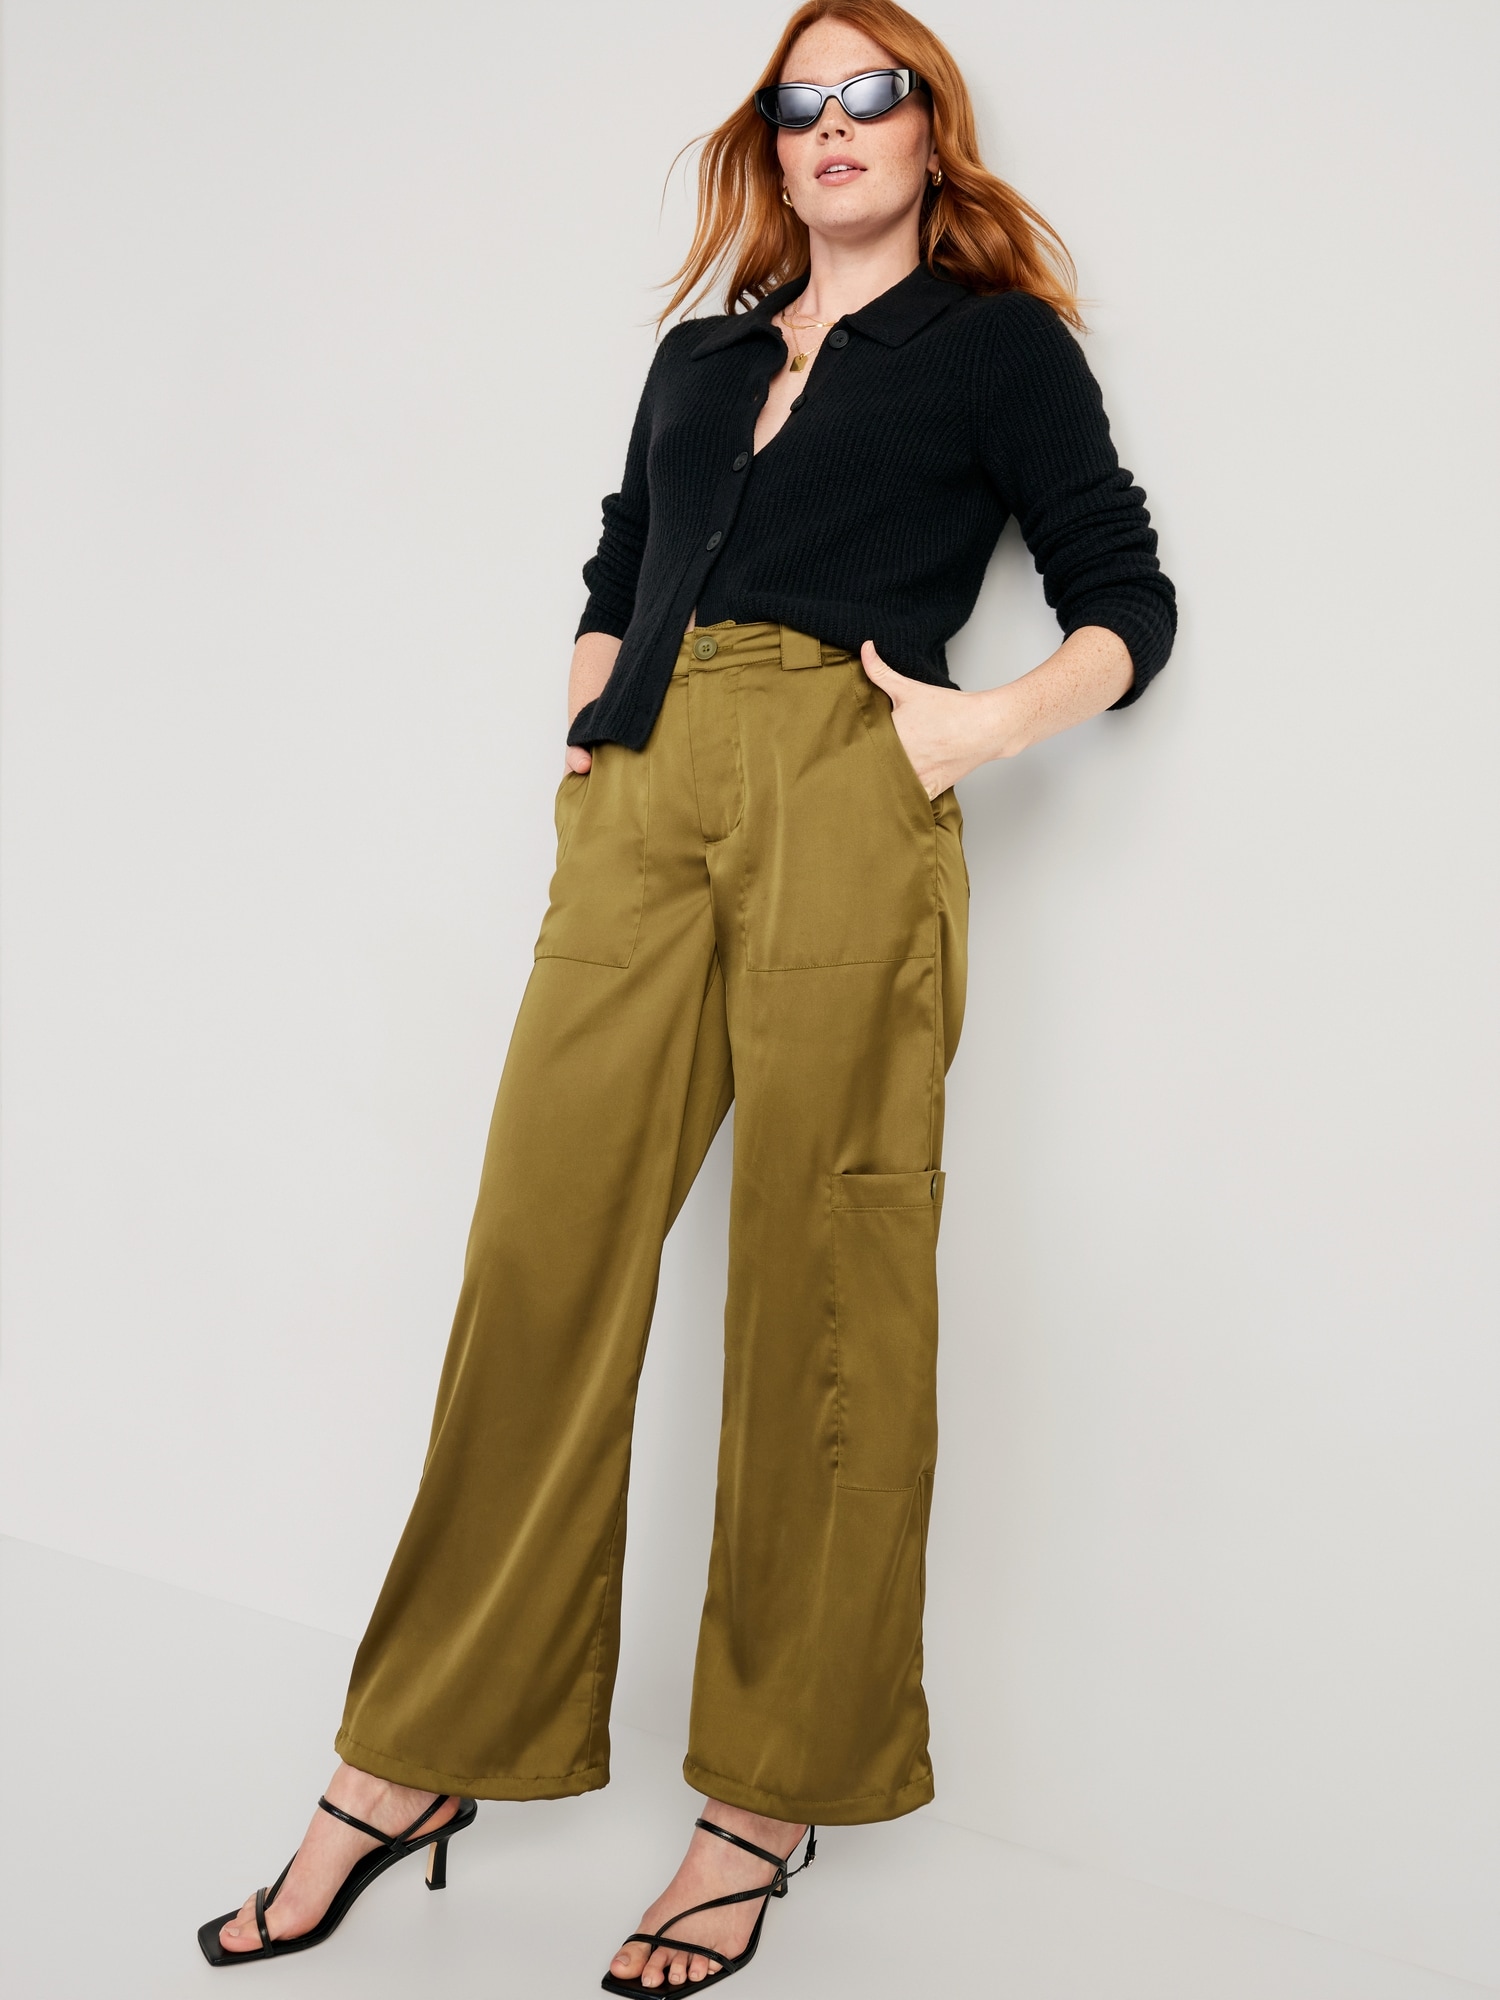 Women's Satin Cargo Joggers Pants Dressy Casual Silky Elastic High Waist  Trousers Black at  Women's Clothing store